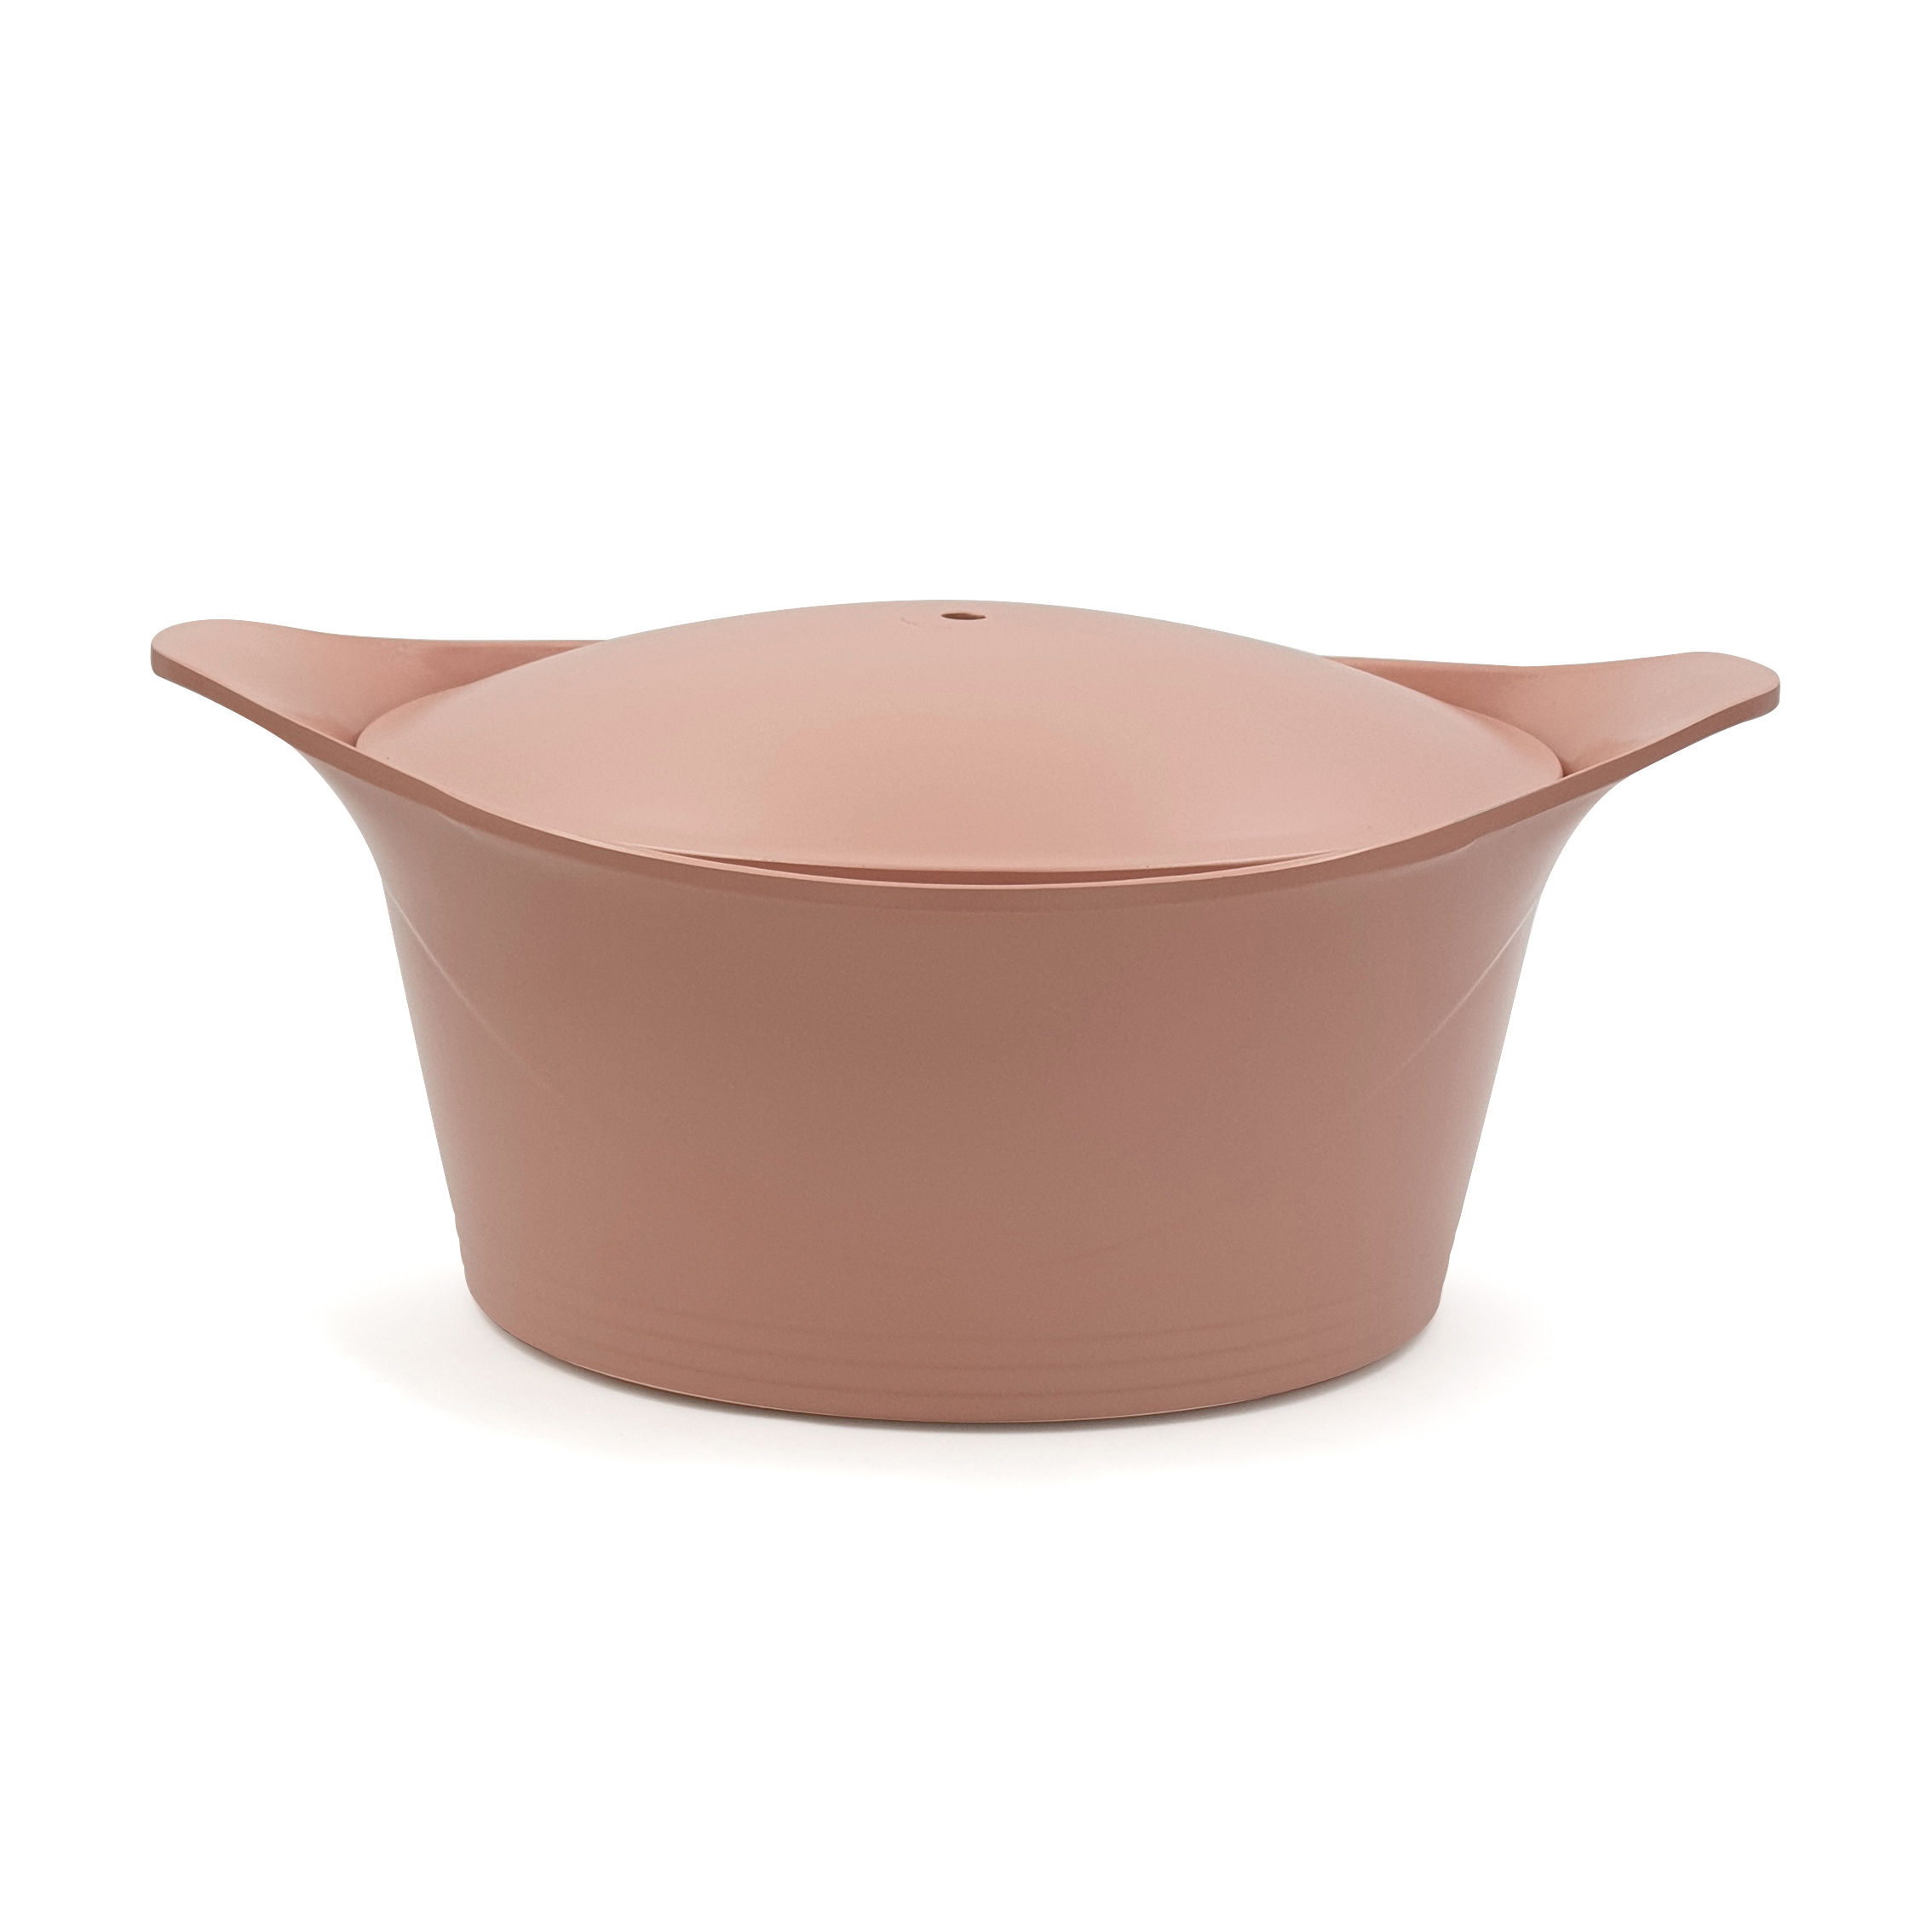 Cookut Ma jolie cocotte Casserole dish - Pink | Made In Design UK